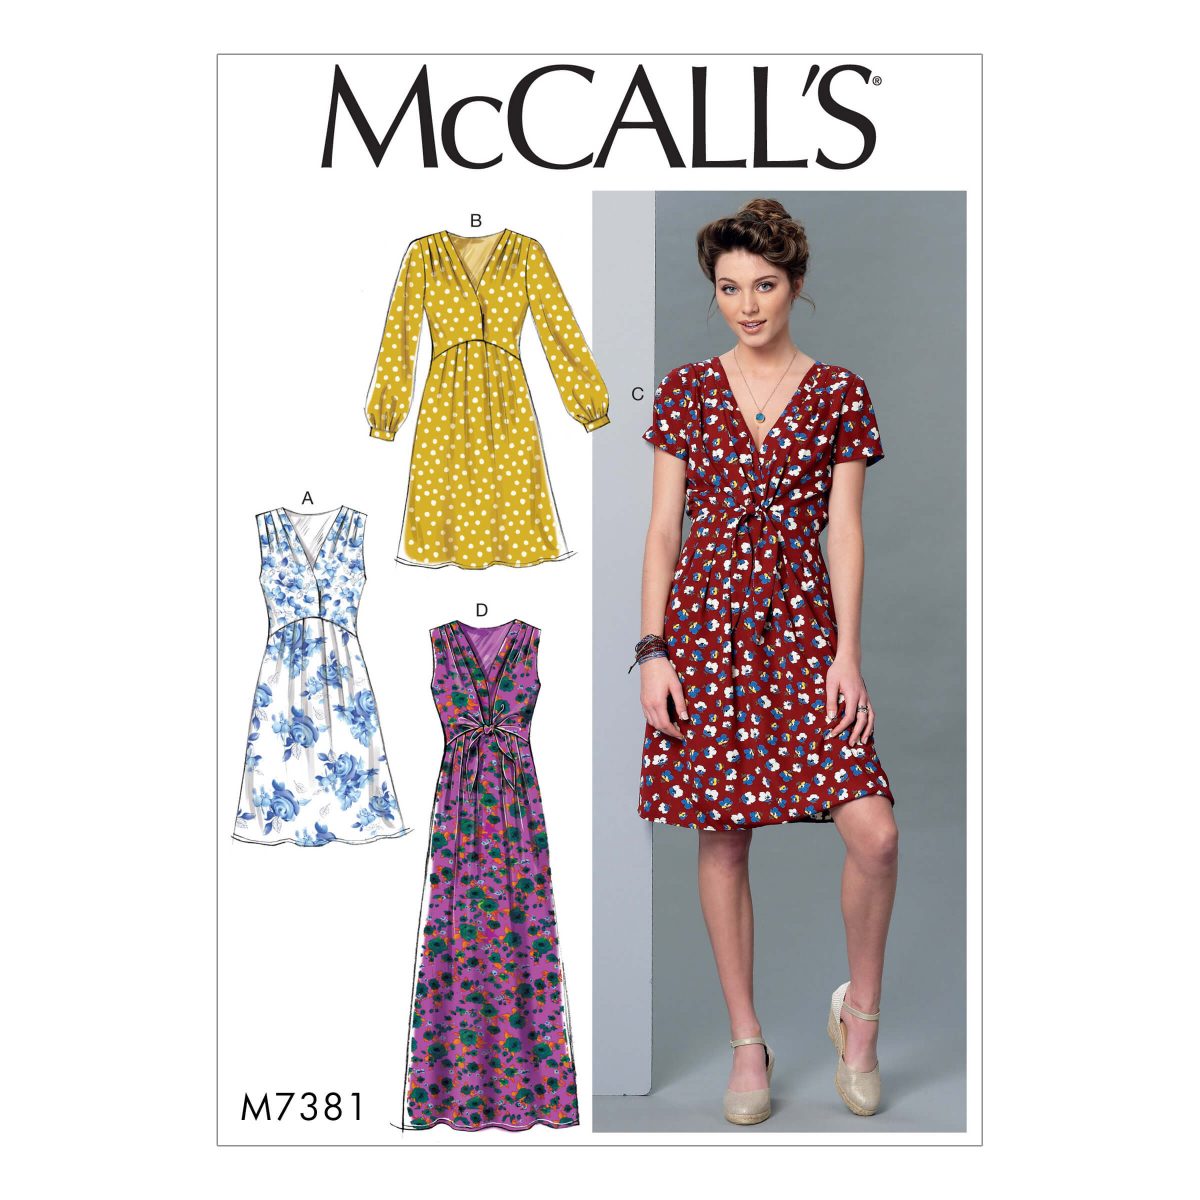 McCall's Sewing Pattern M7381 Misses' Pleated Dresses with Optional Front-Tie